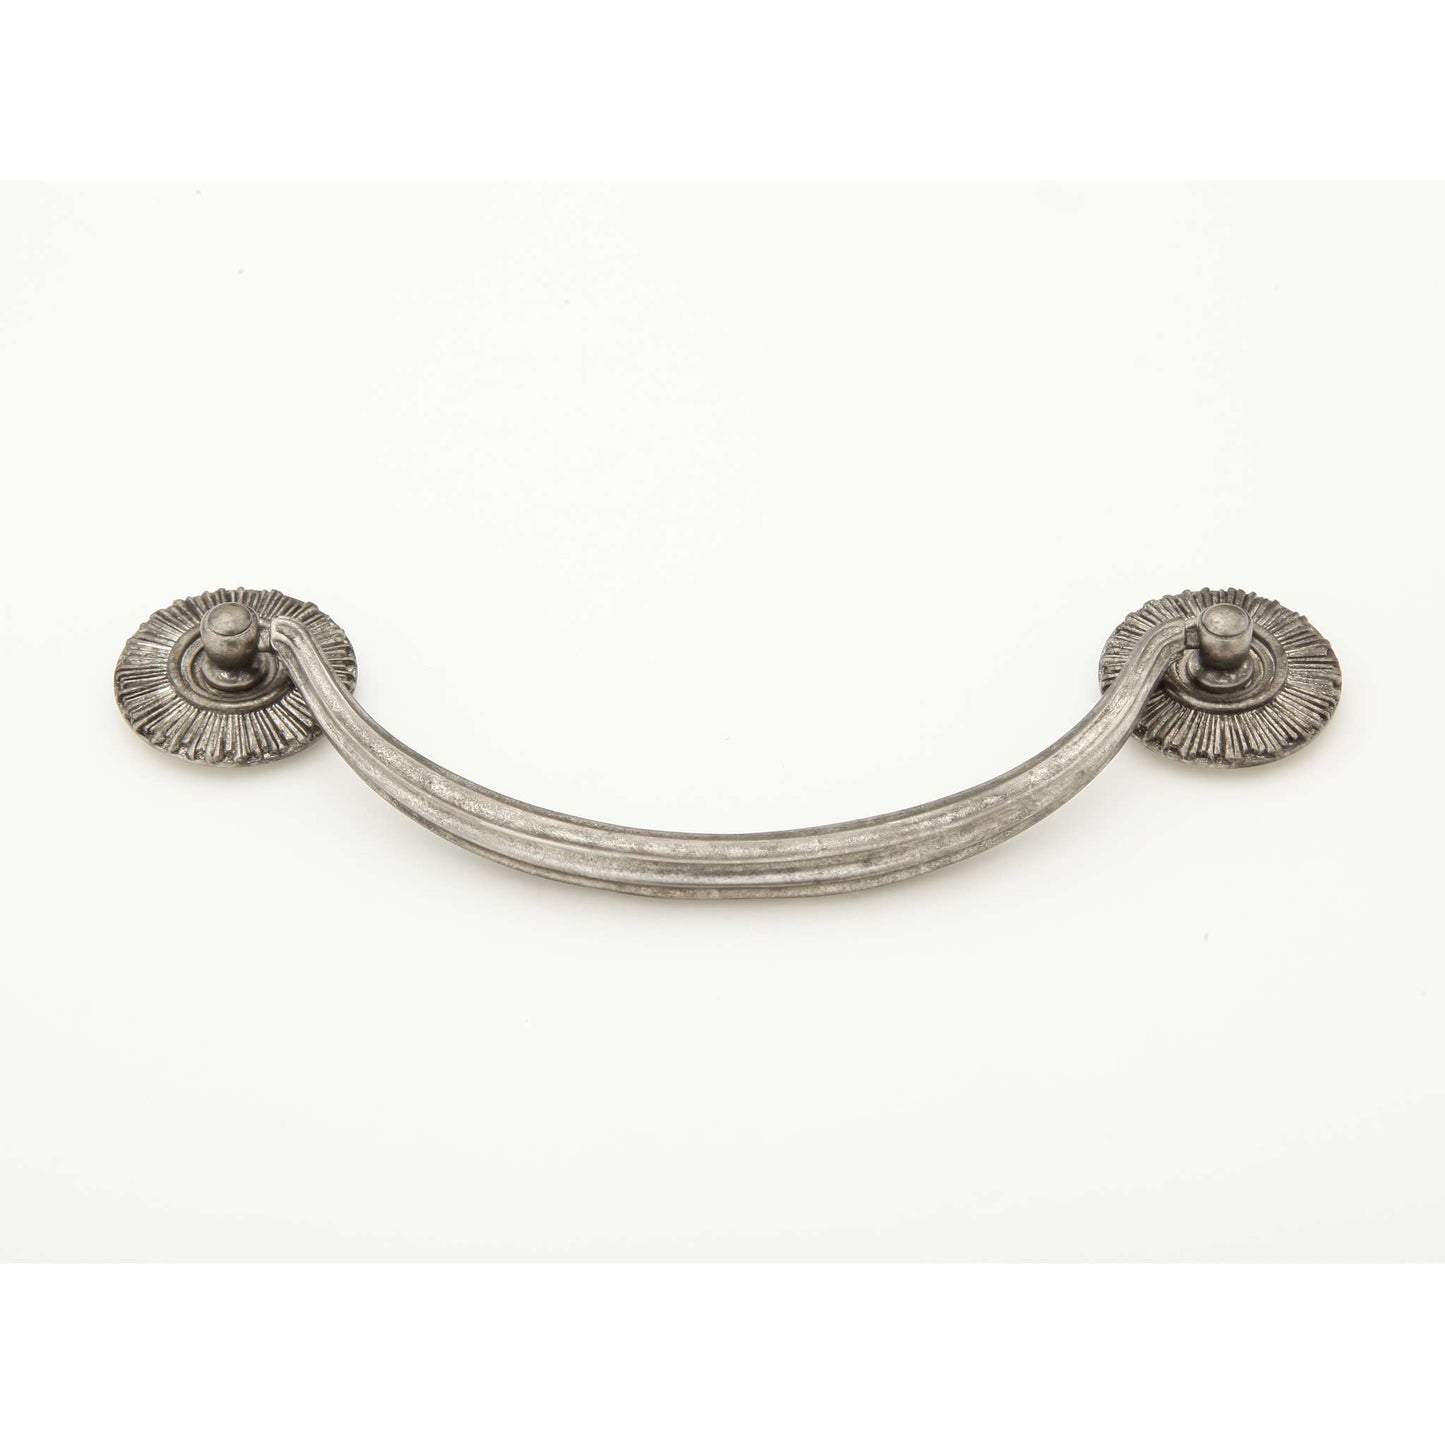 Schaub and Company - Sunburst Cabinet Pull Bail With Rosettes